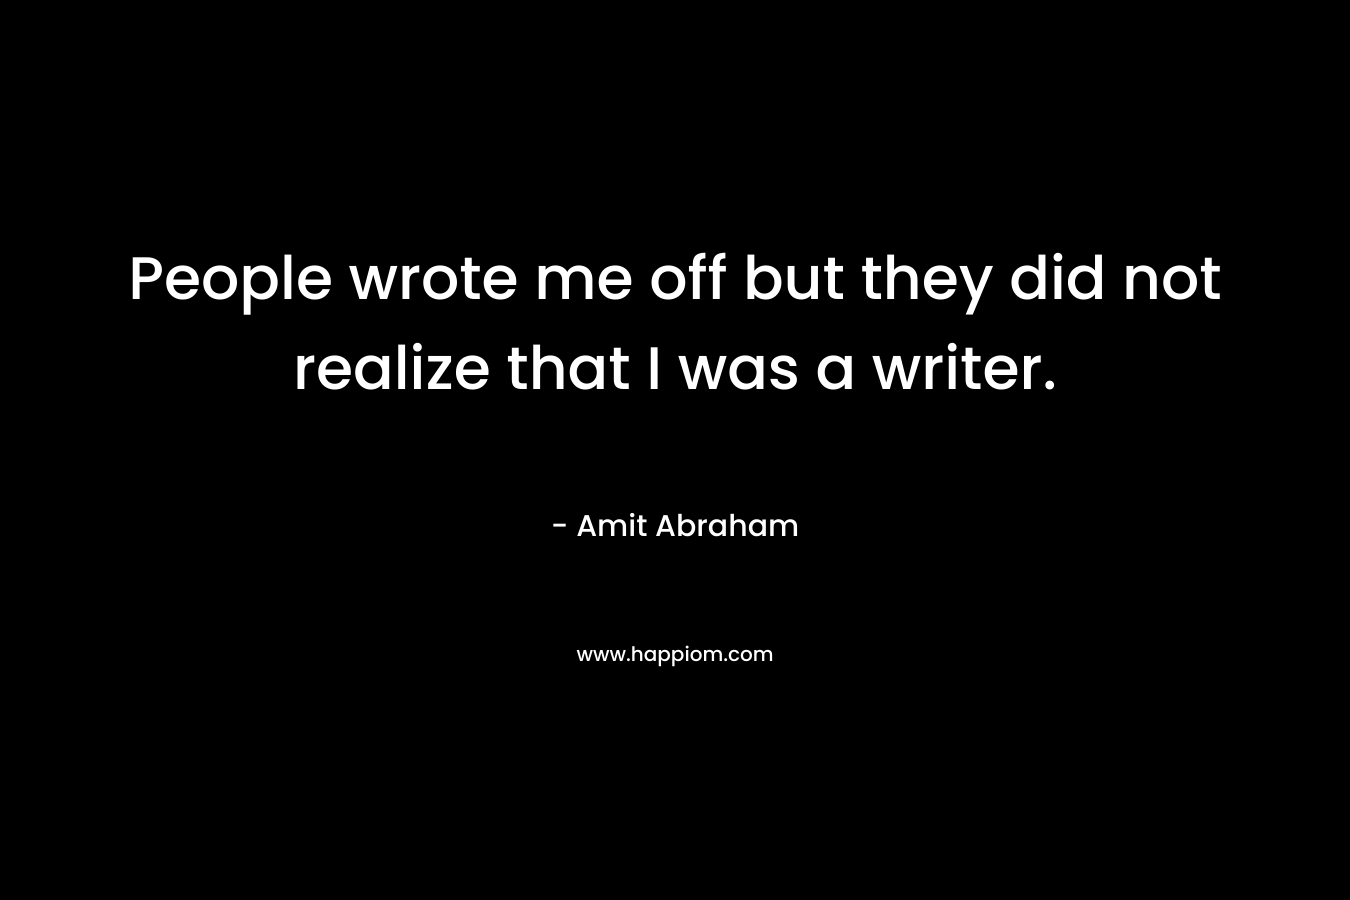 People wrote me off but they did not realize that I was a writer.